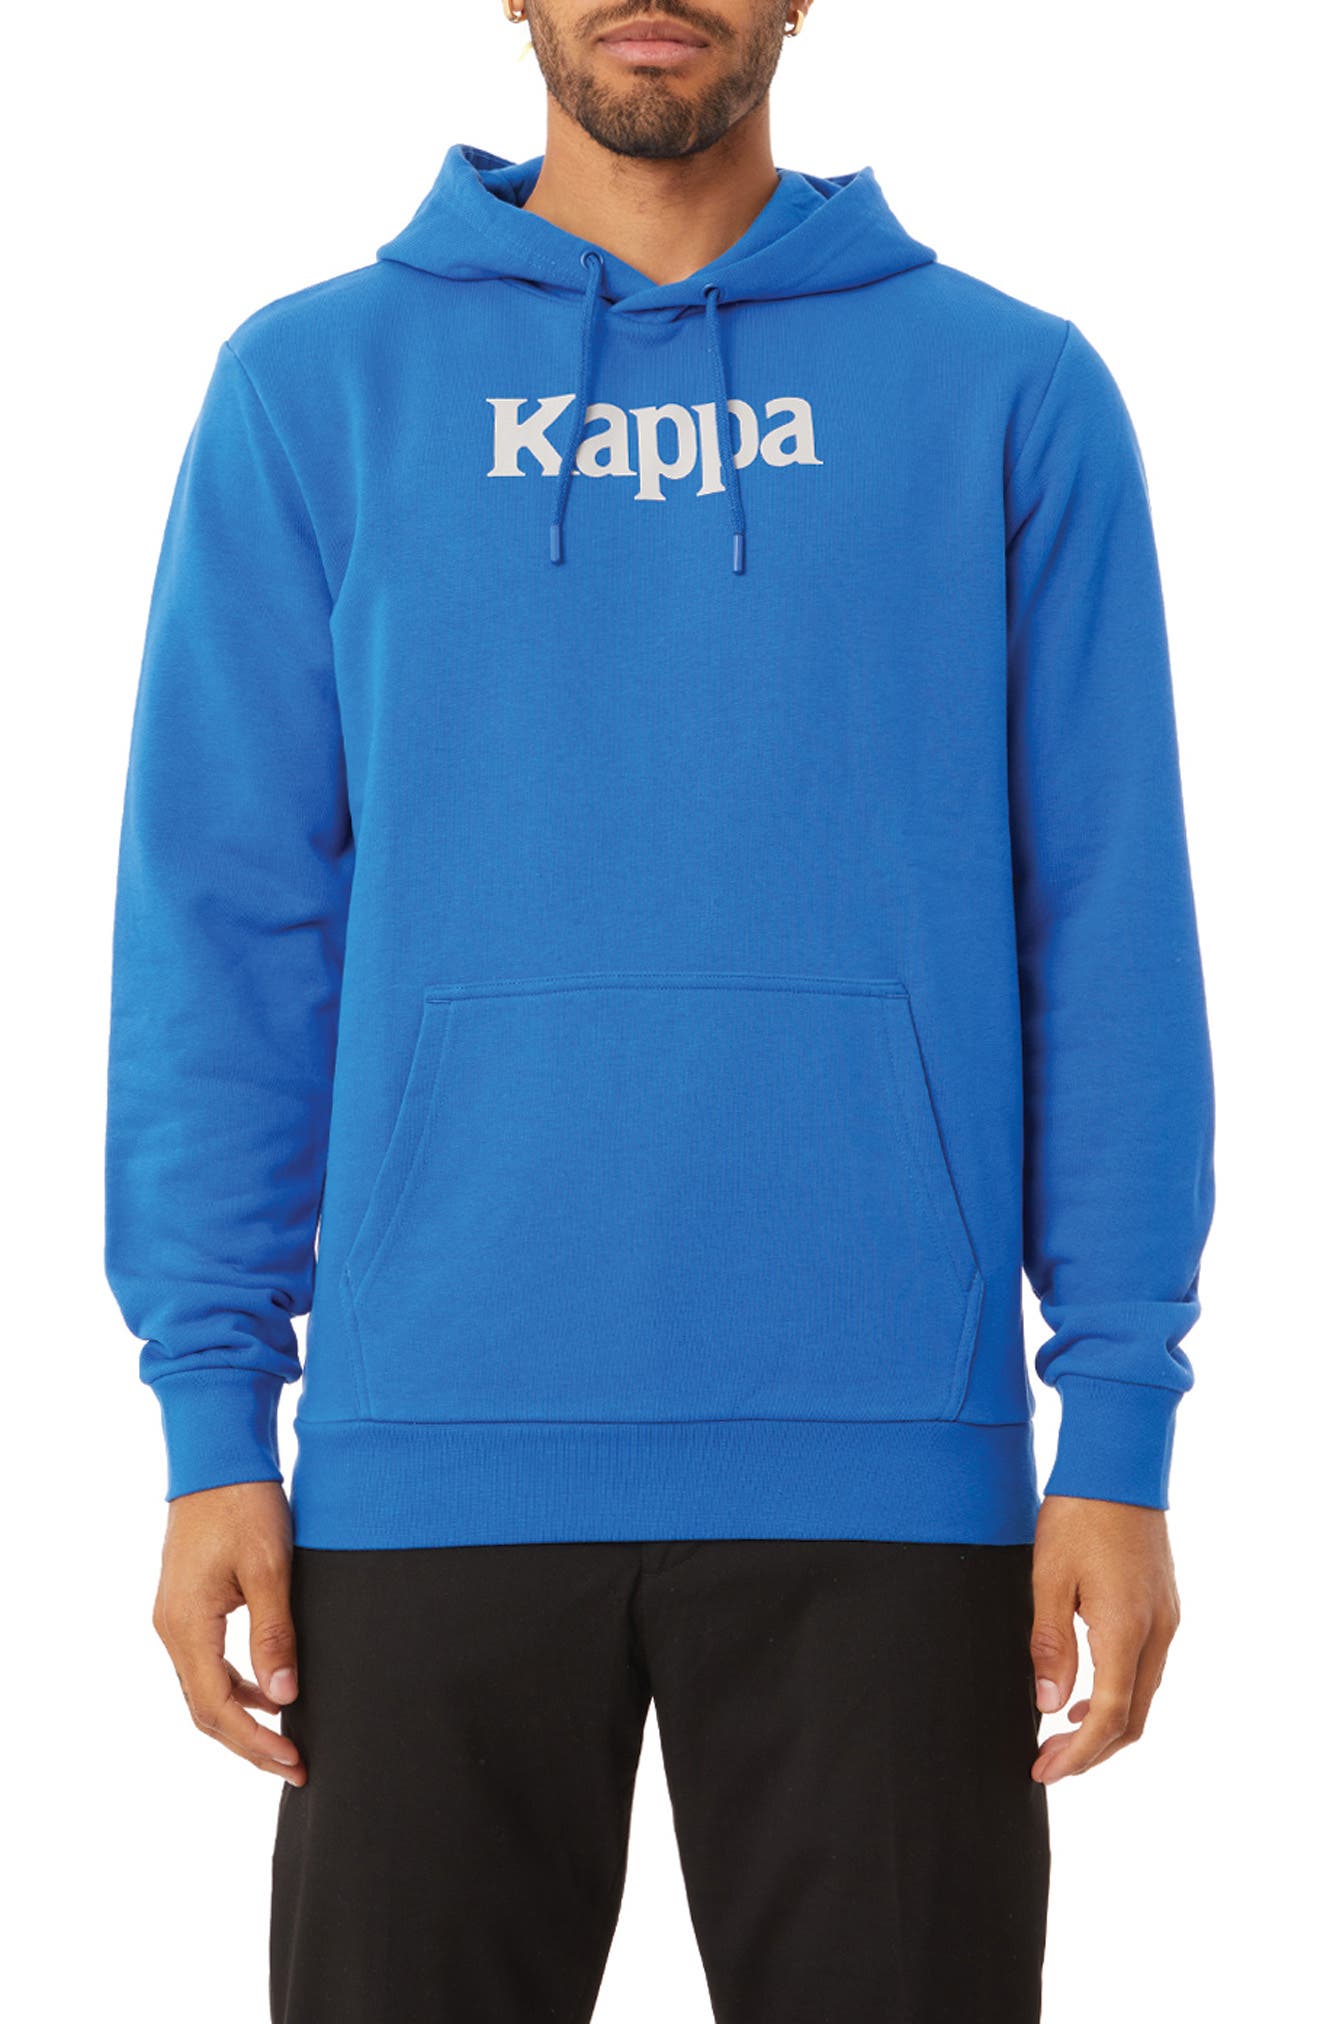 Kappa Authentic Harris Hoodie in Bl Lpis-Grn Lim-Orng-Gry Ash at Nordstrom, Size Medium